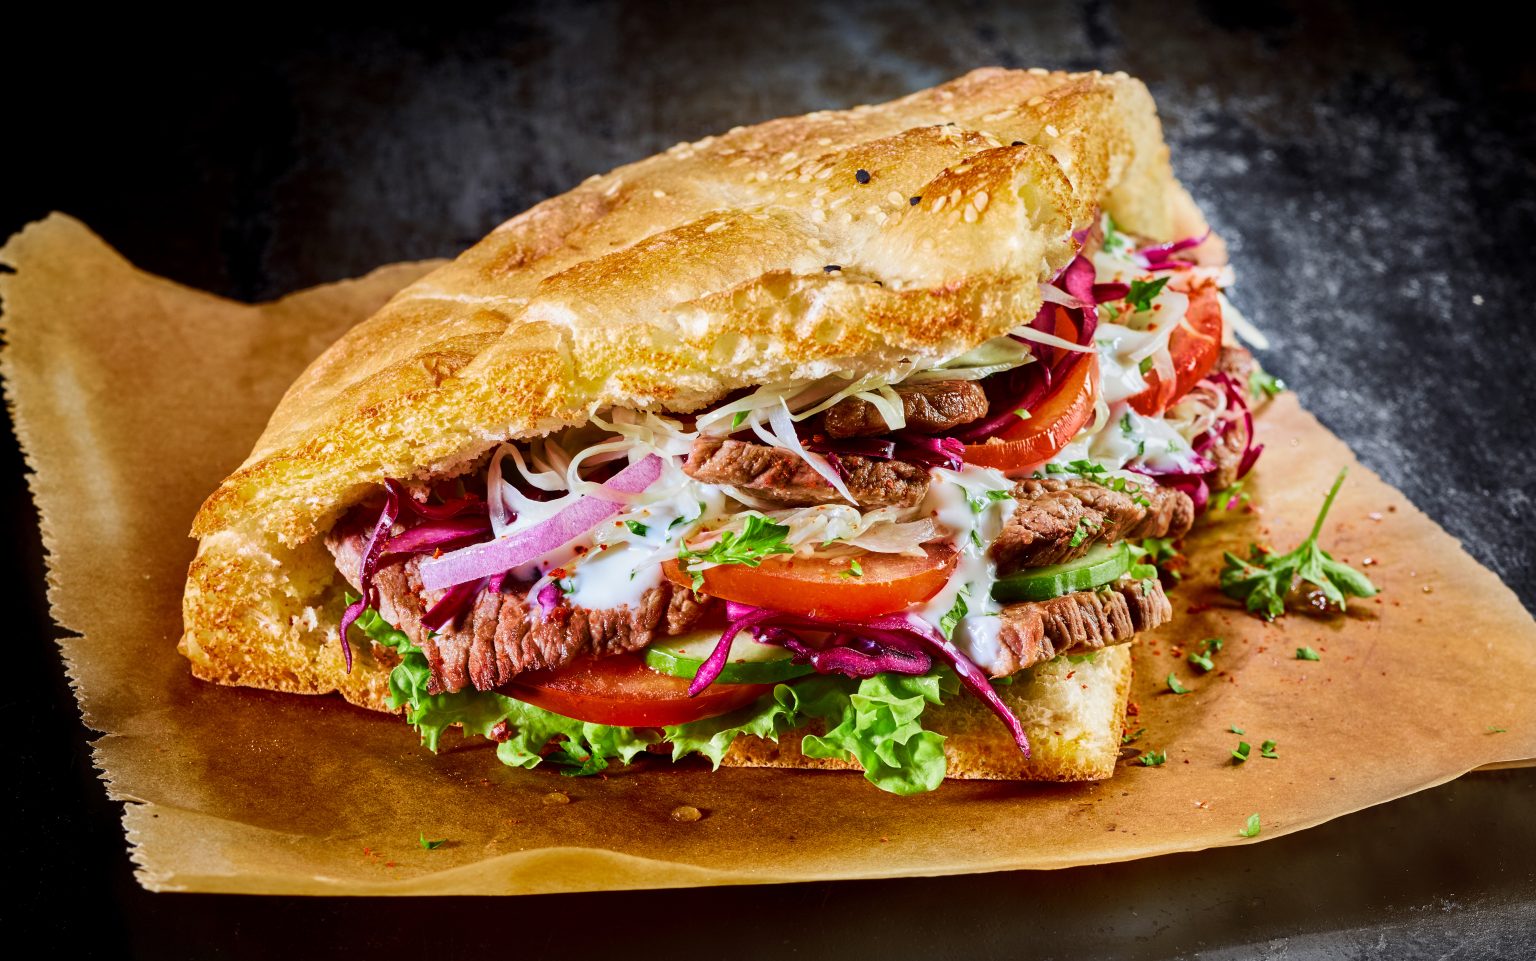 Turkish doner kebab on golden toasted pita bread filled with rotisserie roasted meat and fresh salad ingredients served on brown paper